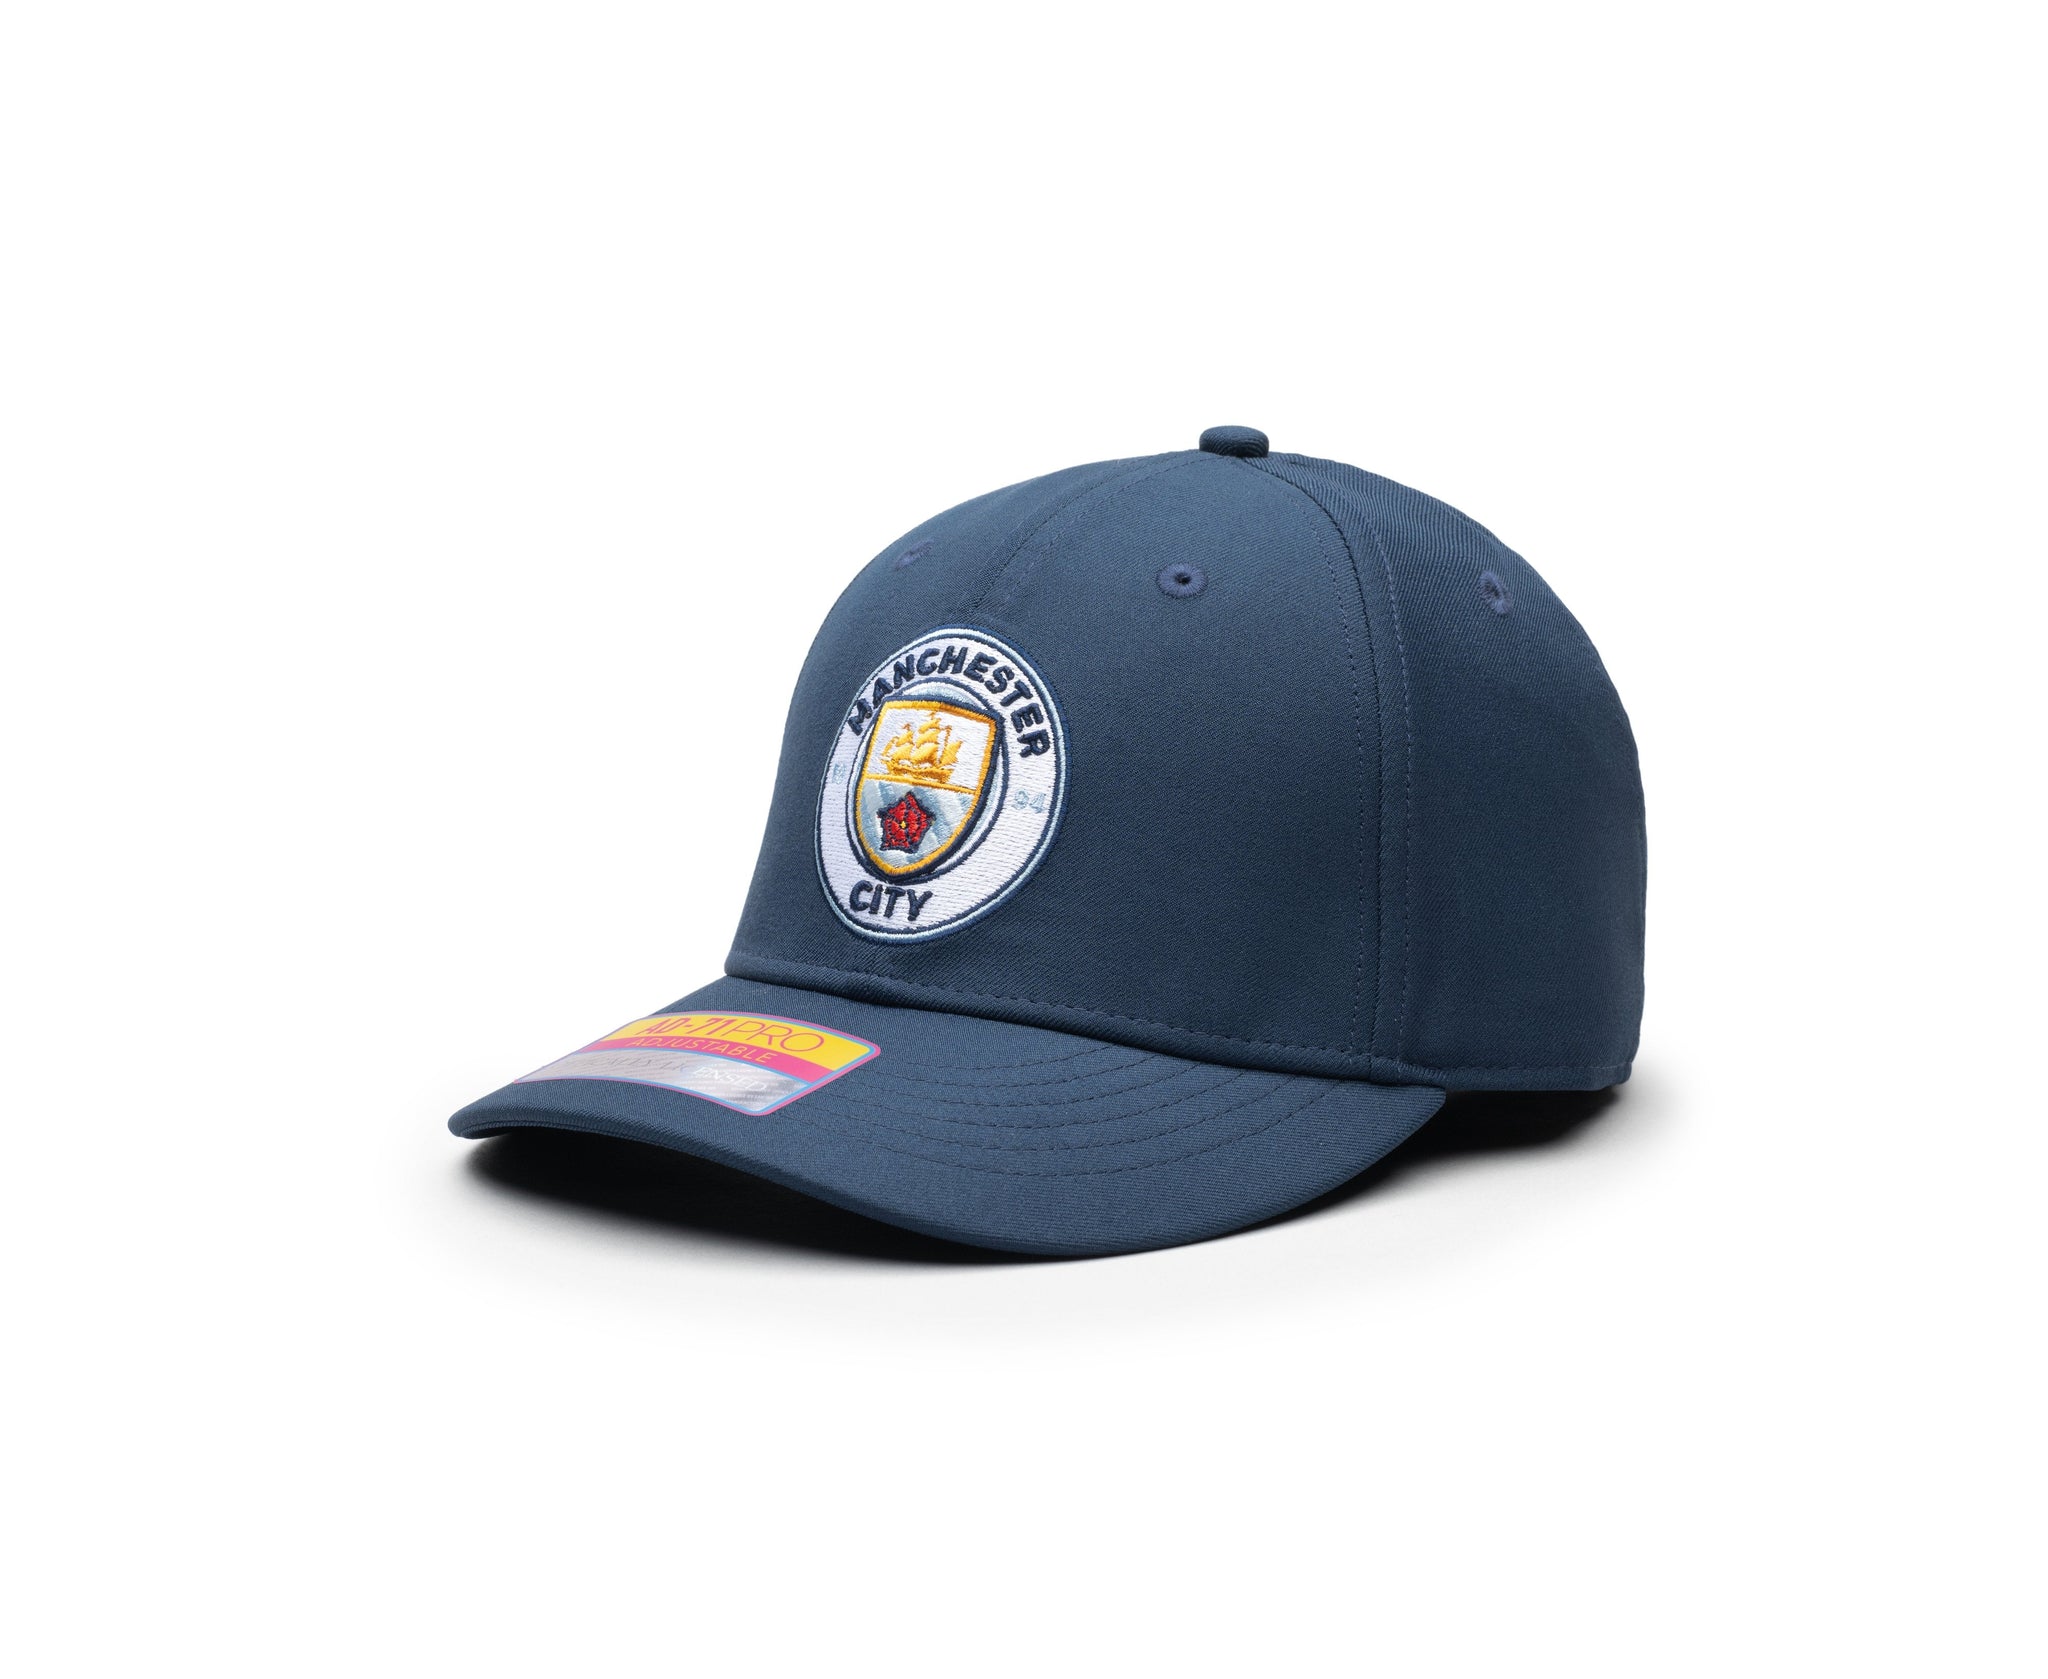 Manchester City Standard Adjustable hat with mid crown, curved peak brim, and adjustable closure.